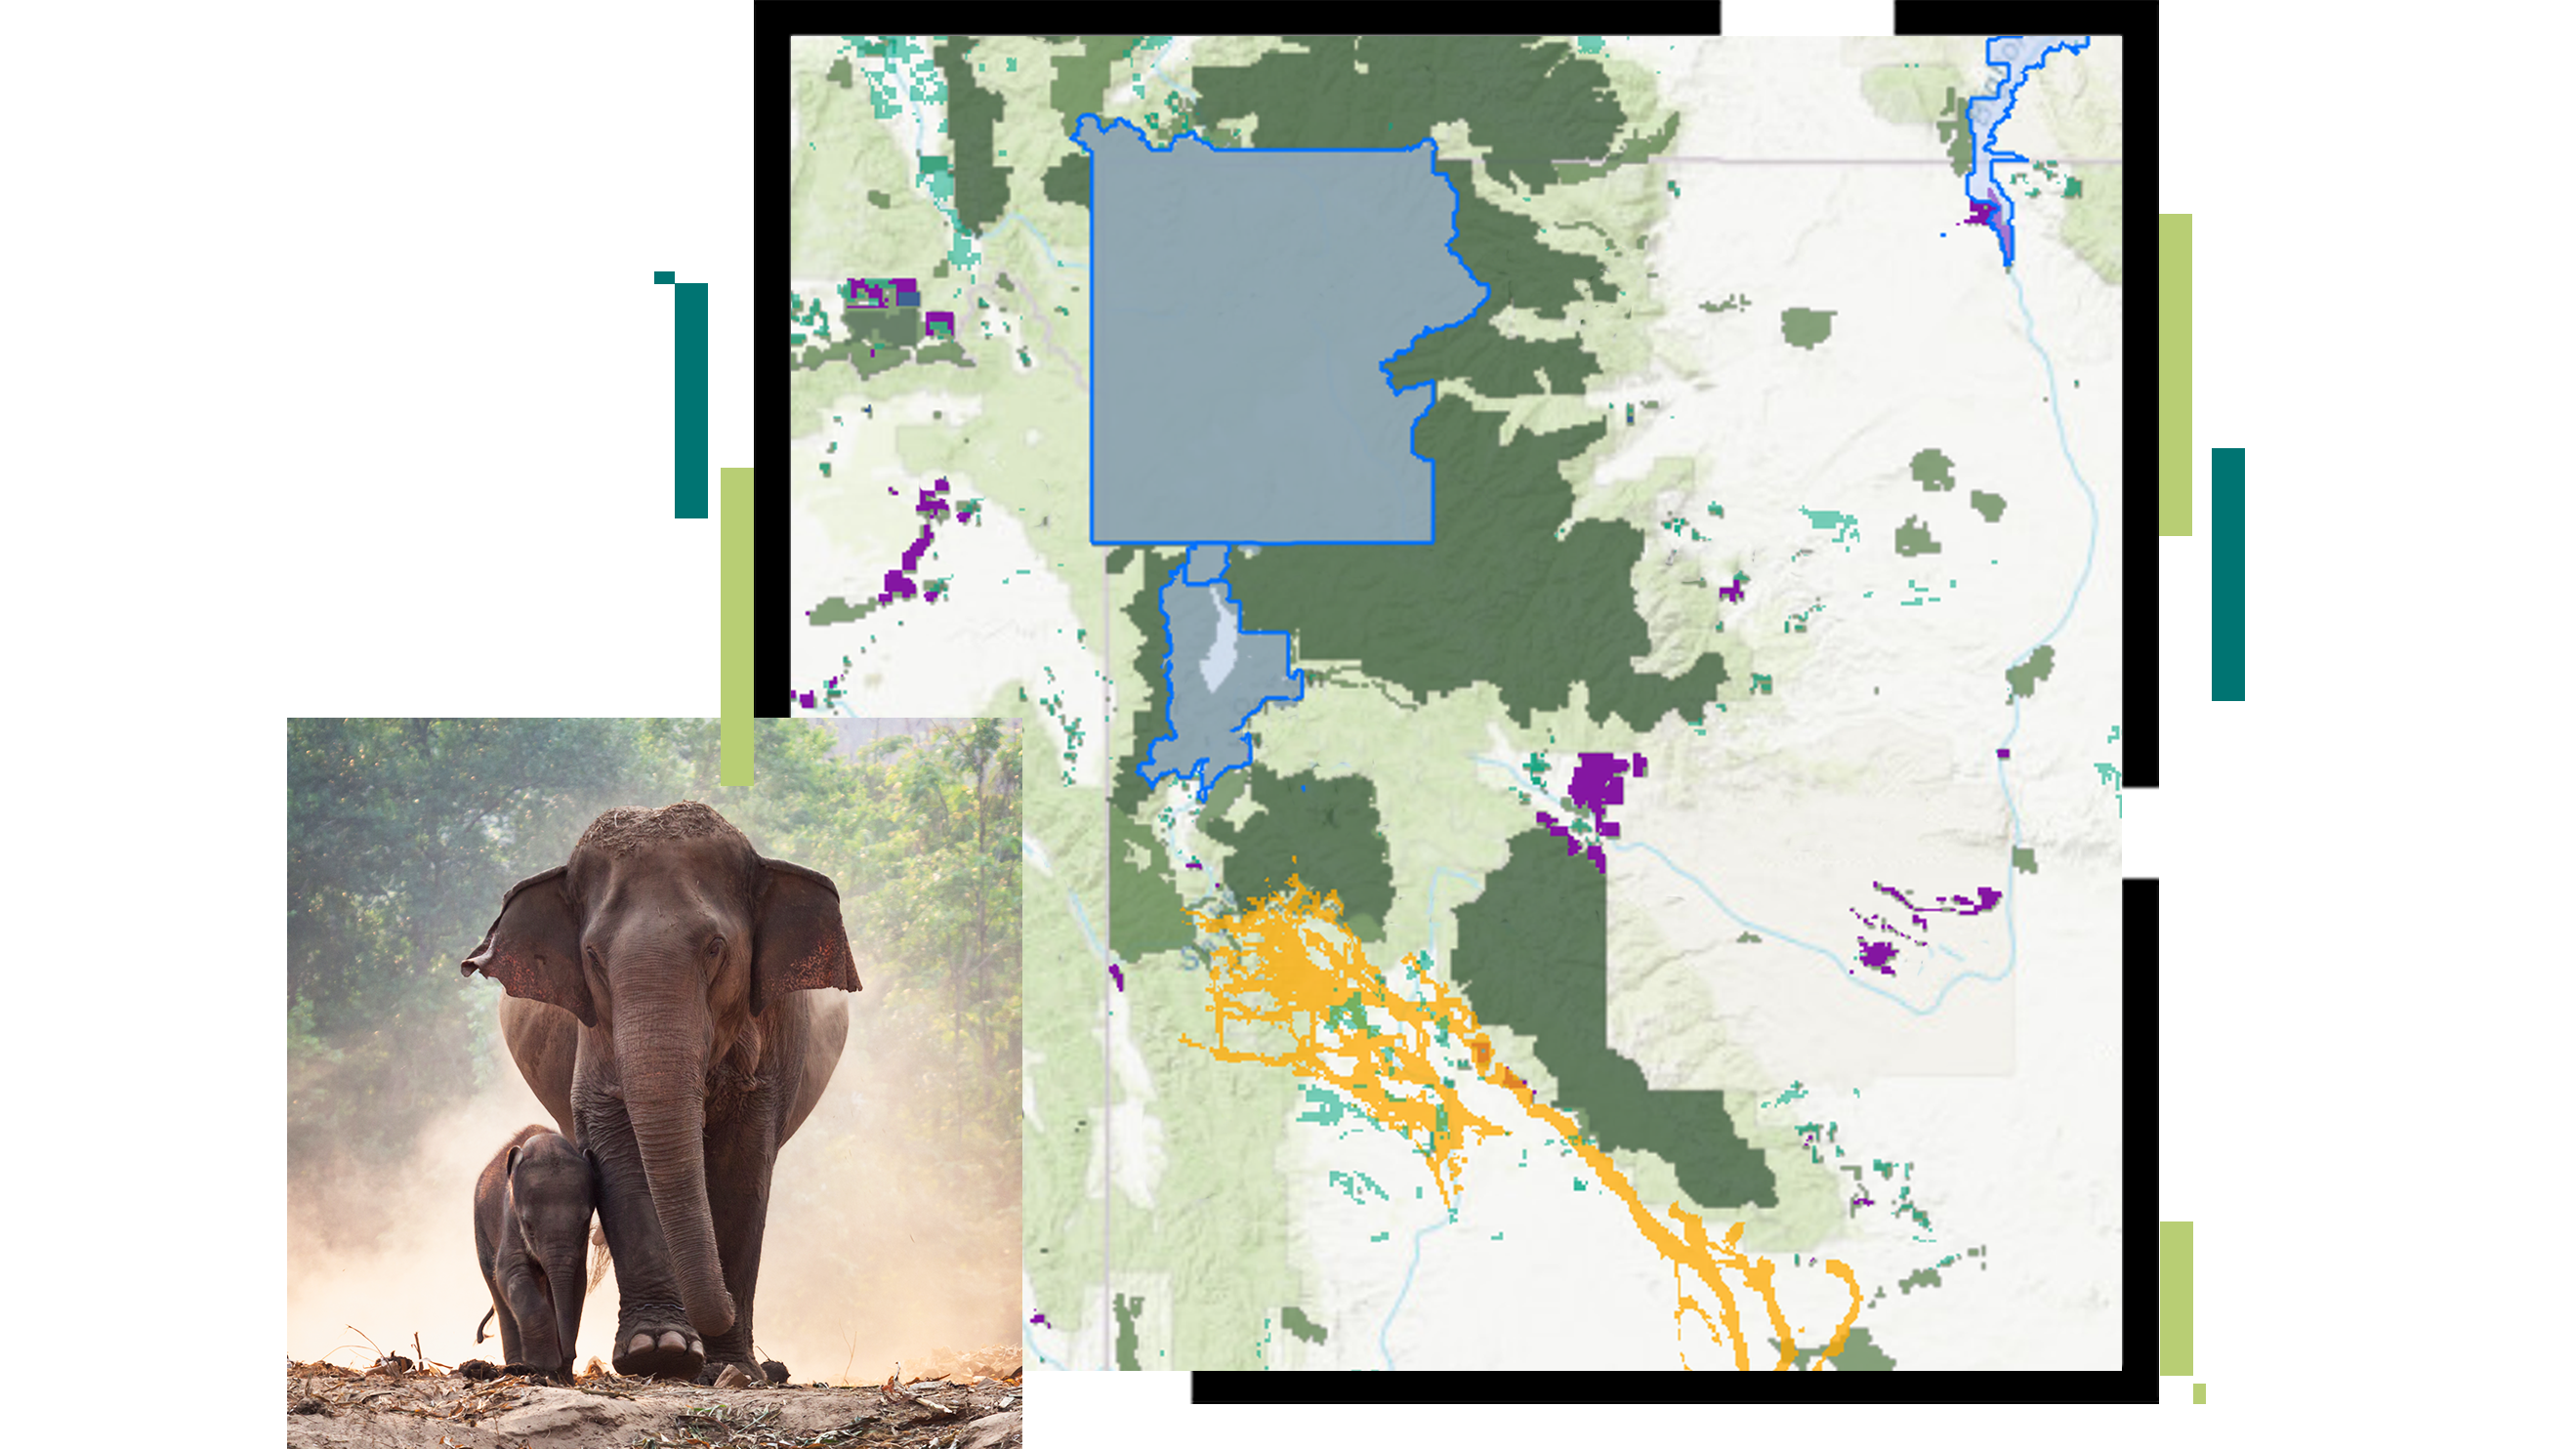 A map with a proposed conservation area outlined in blue overlaid with an image of an elephant and its calf